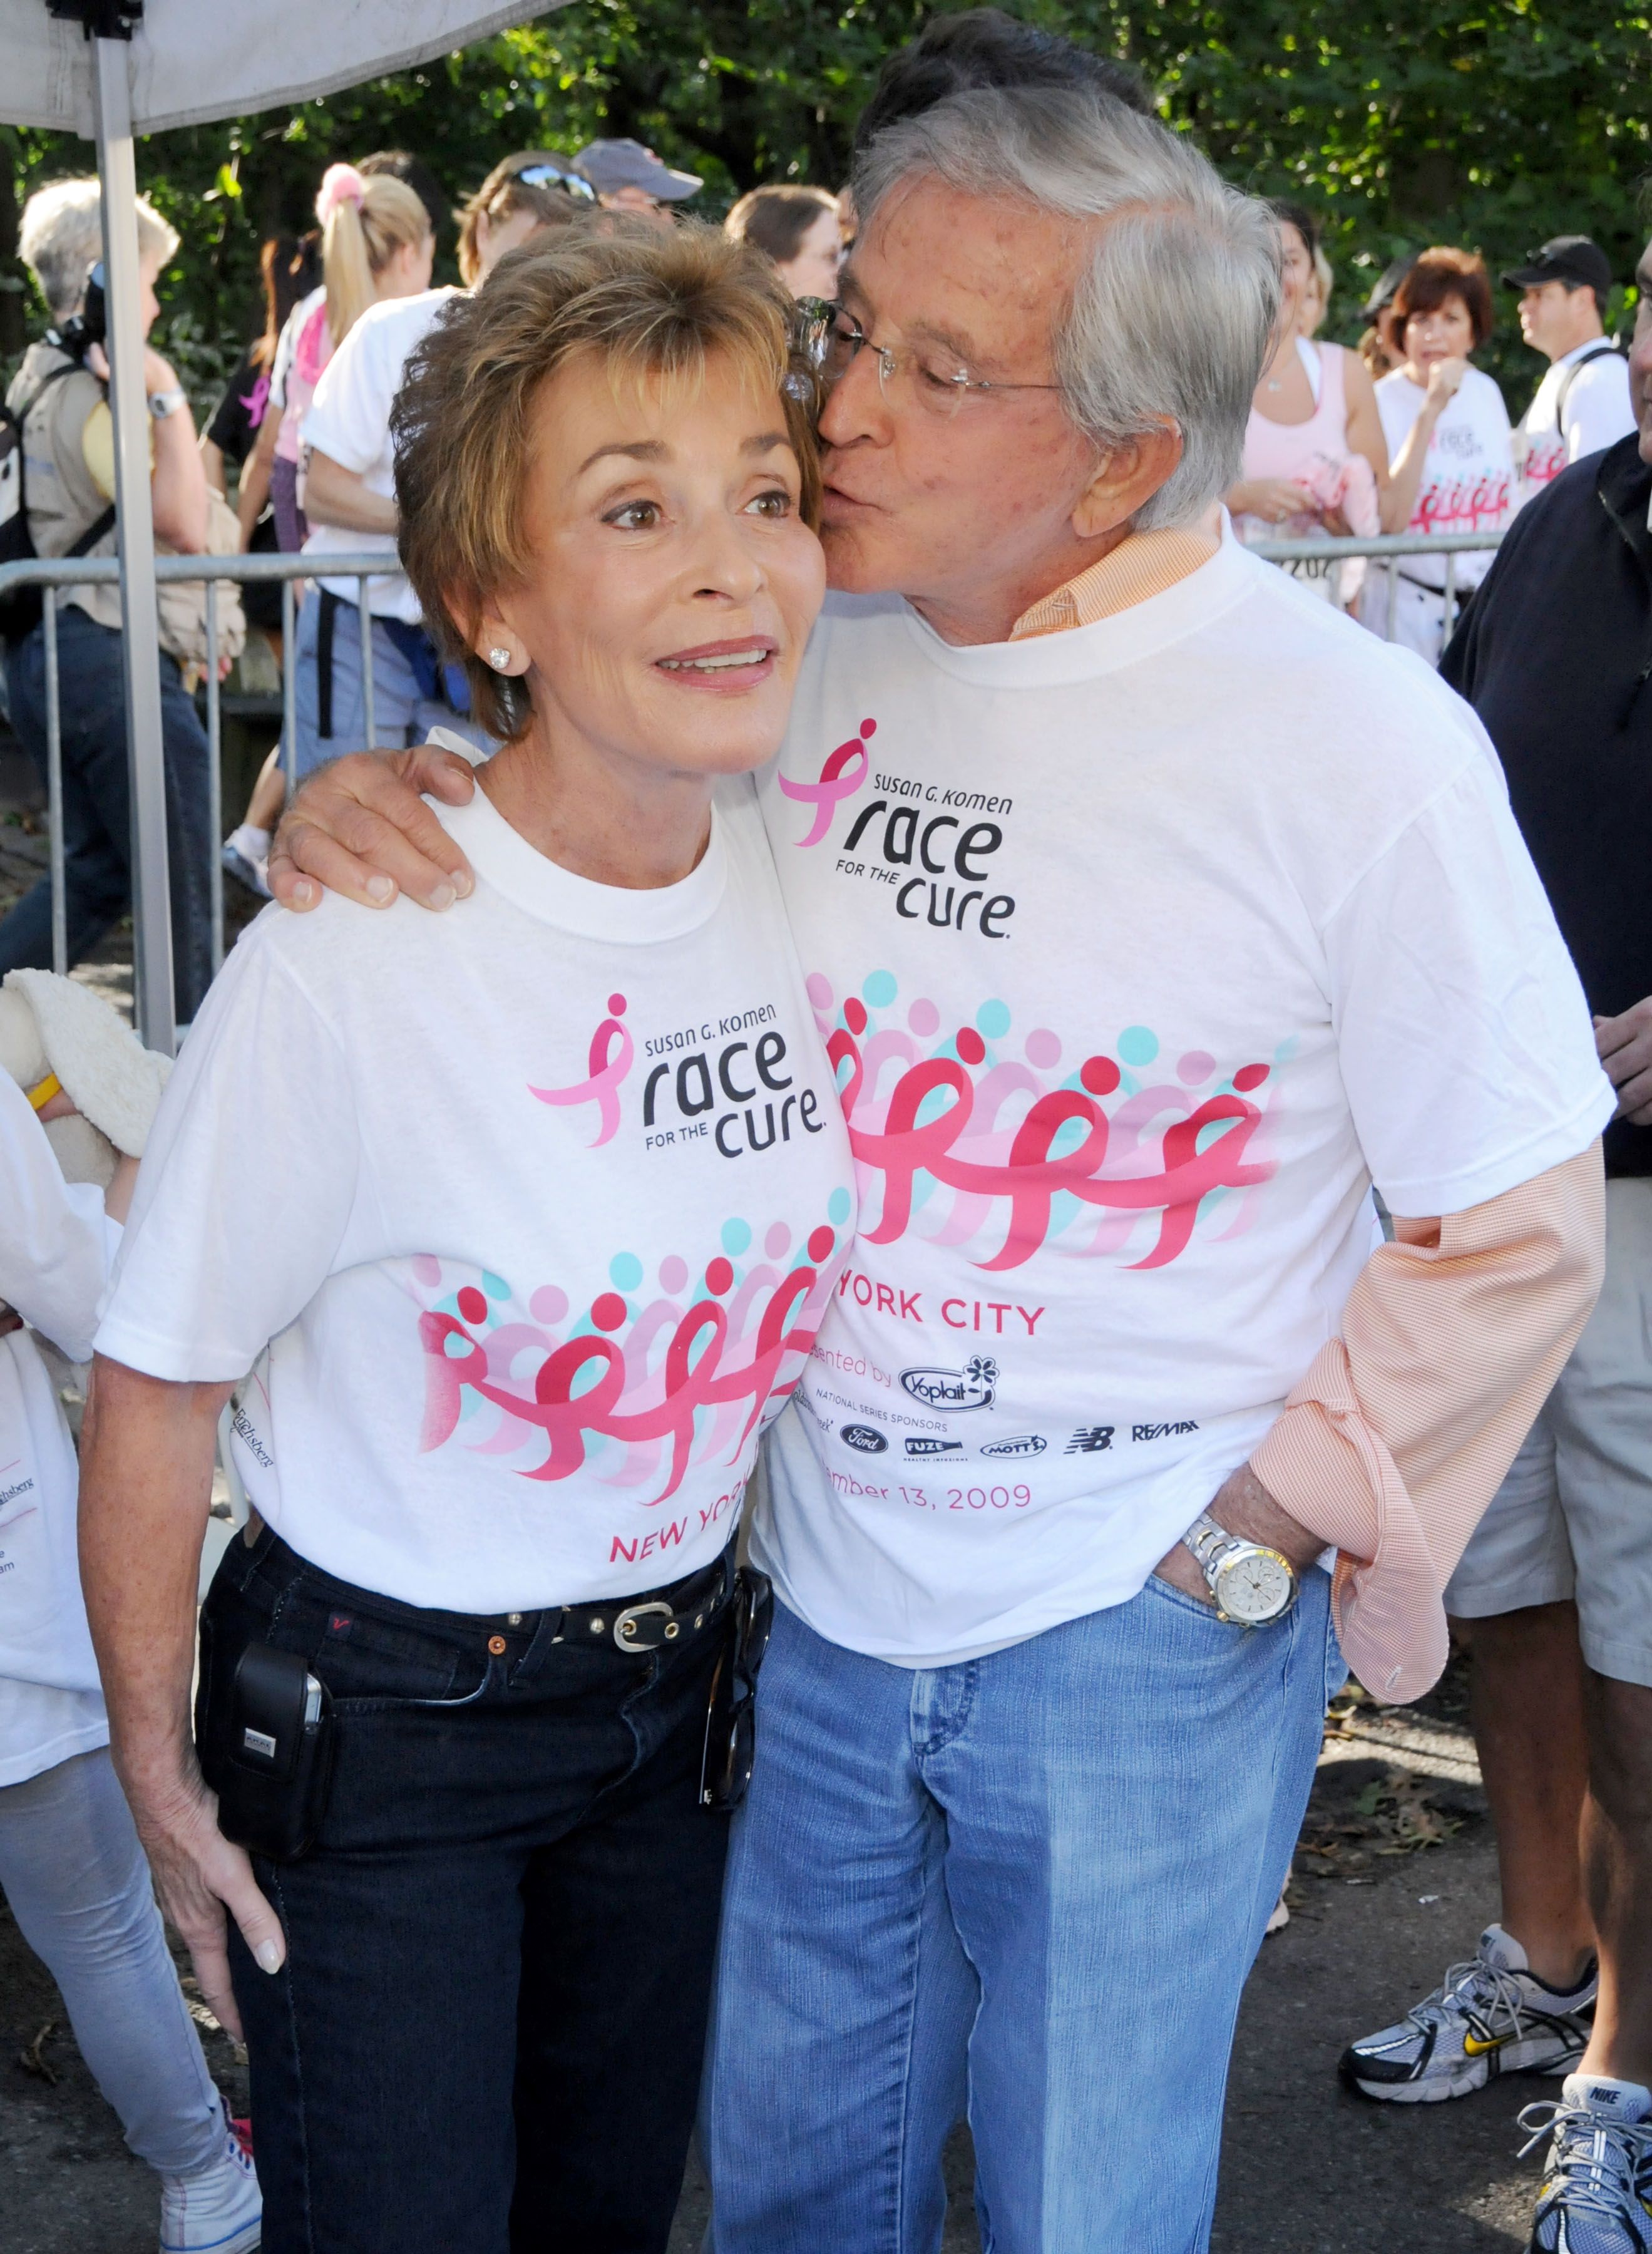 Judy and Jerry Sheindlin at the Susan G. Komen New York City Race For The Cure in New York on September 13, 2009 | Source: Getty Images